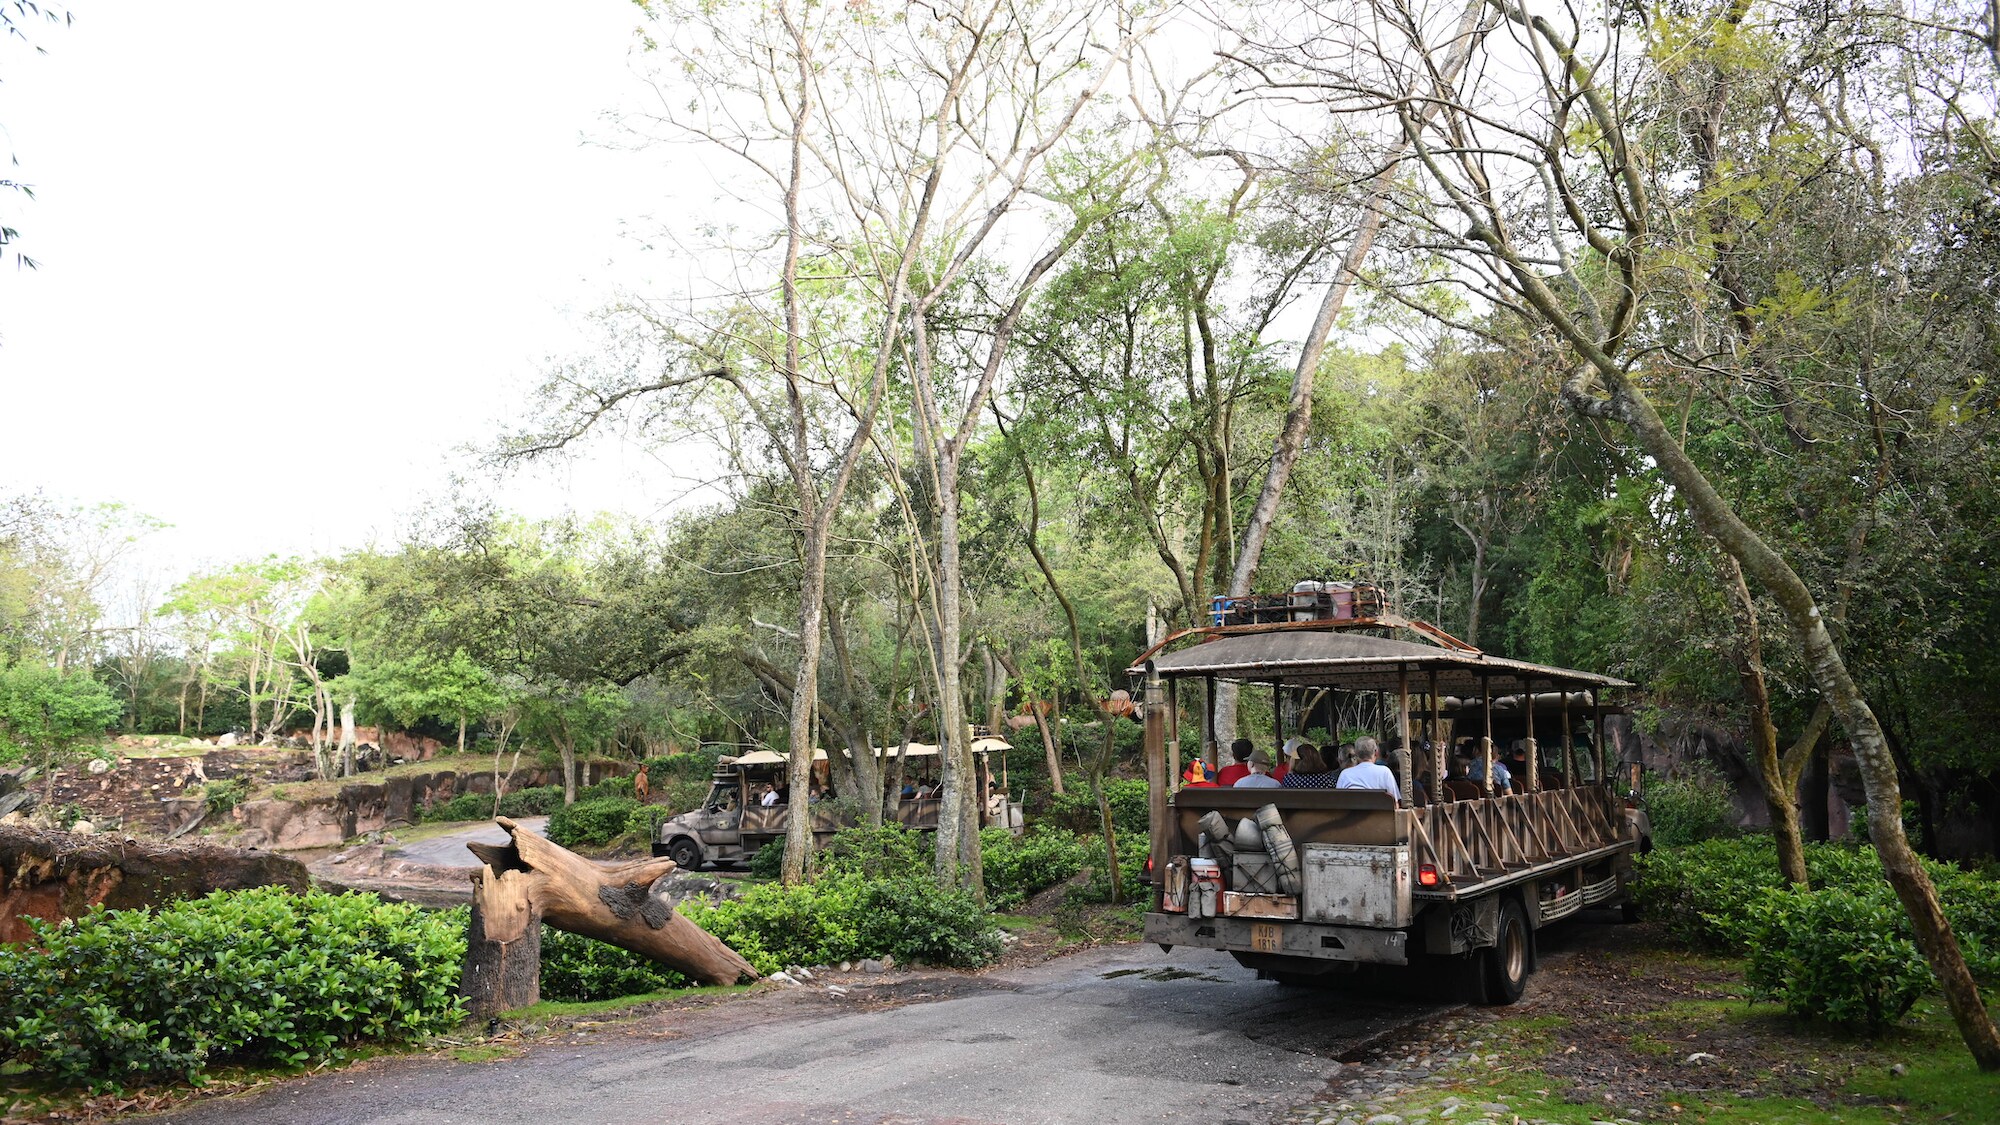 Kilimanjaro Safaris vehicle takes guests on a guided tour of the Harambe Wildlife Reserve. (National Geographic/Gene Page)